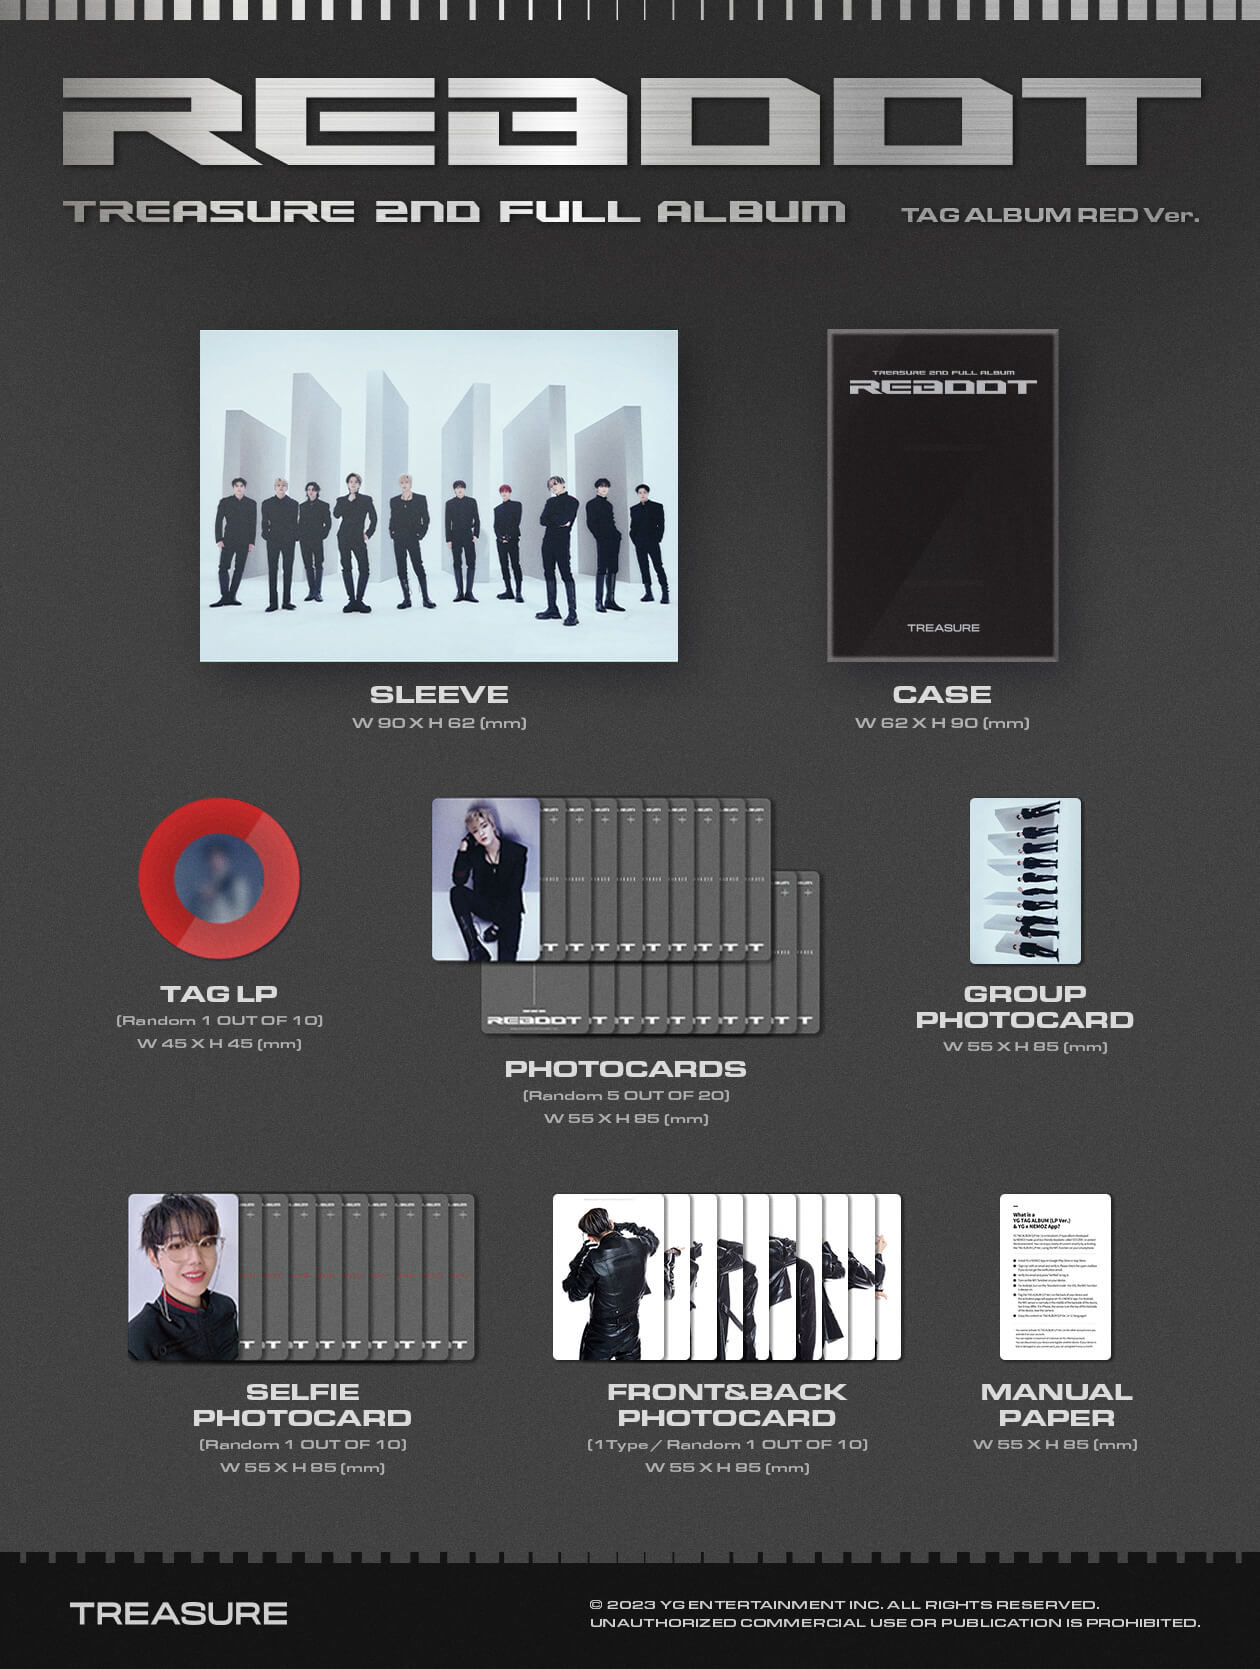 TREASURE REBOOT YG TAG Album RED Ver. Inclusions Sleeve Case TAG LP Photocards Group Photocard Selfie Photocard Front&Back Photocard Manual Paper